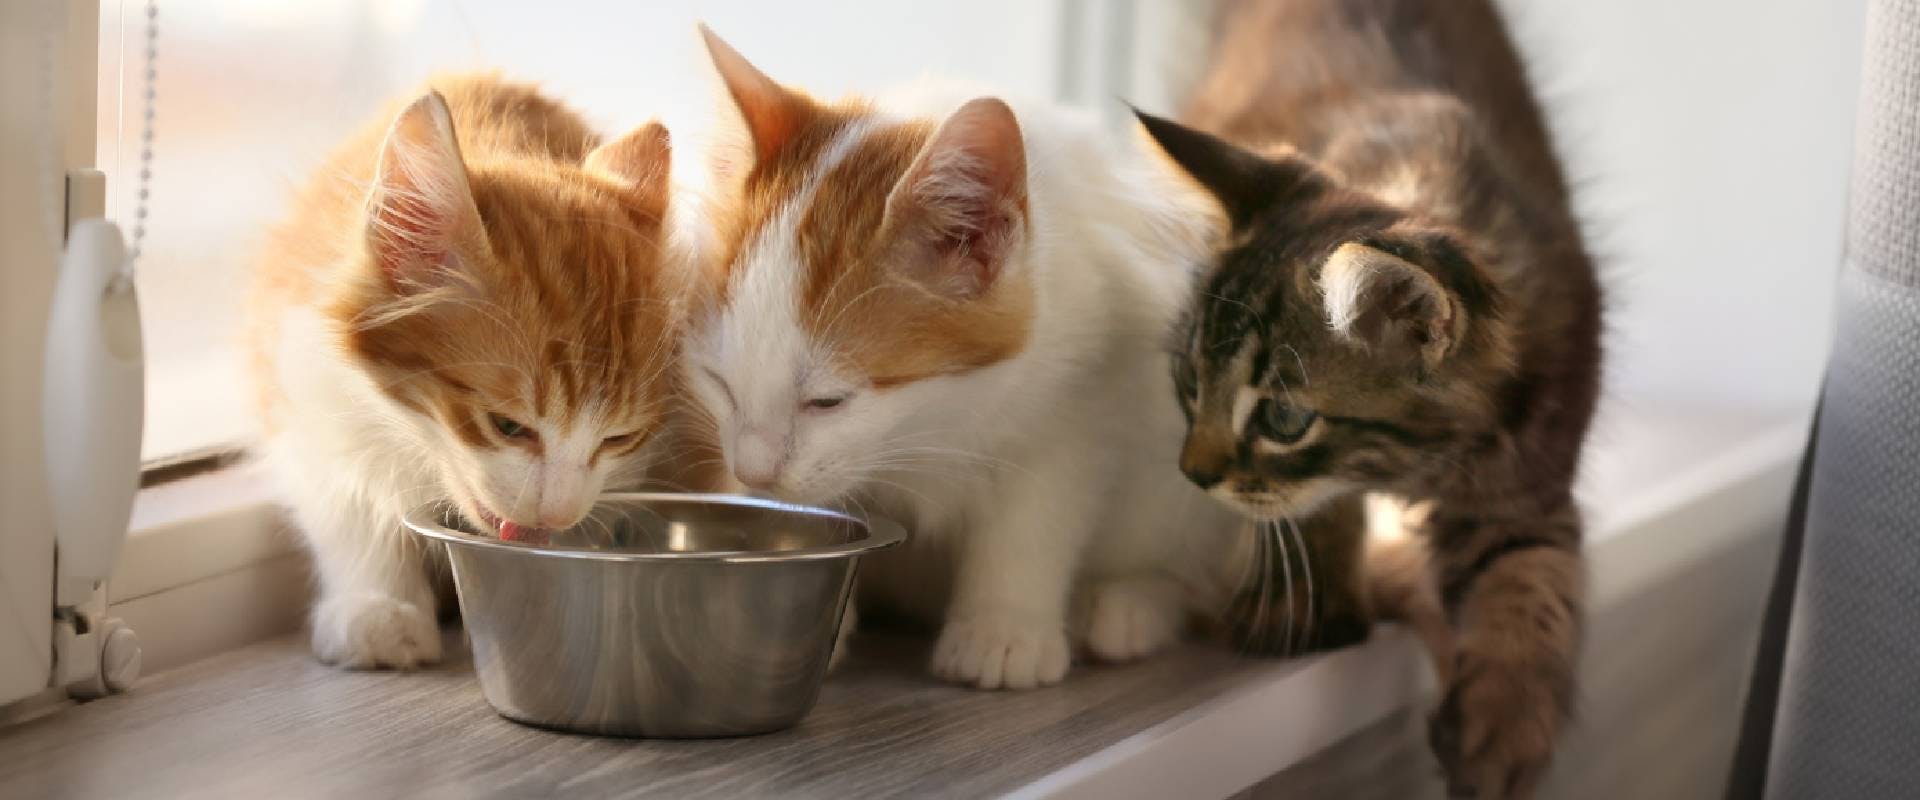 Three cats eating from a bowl